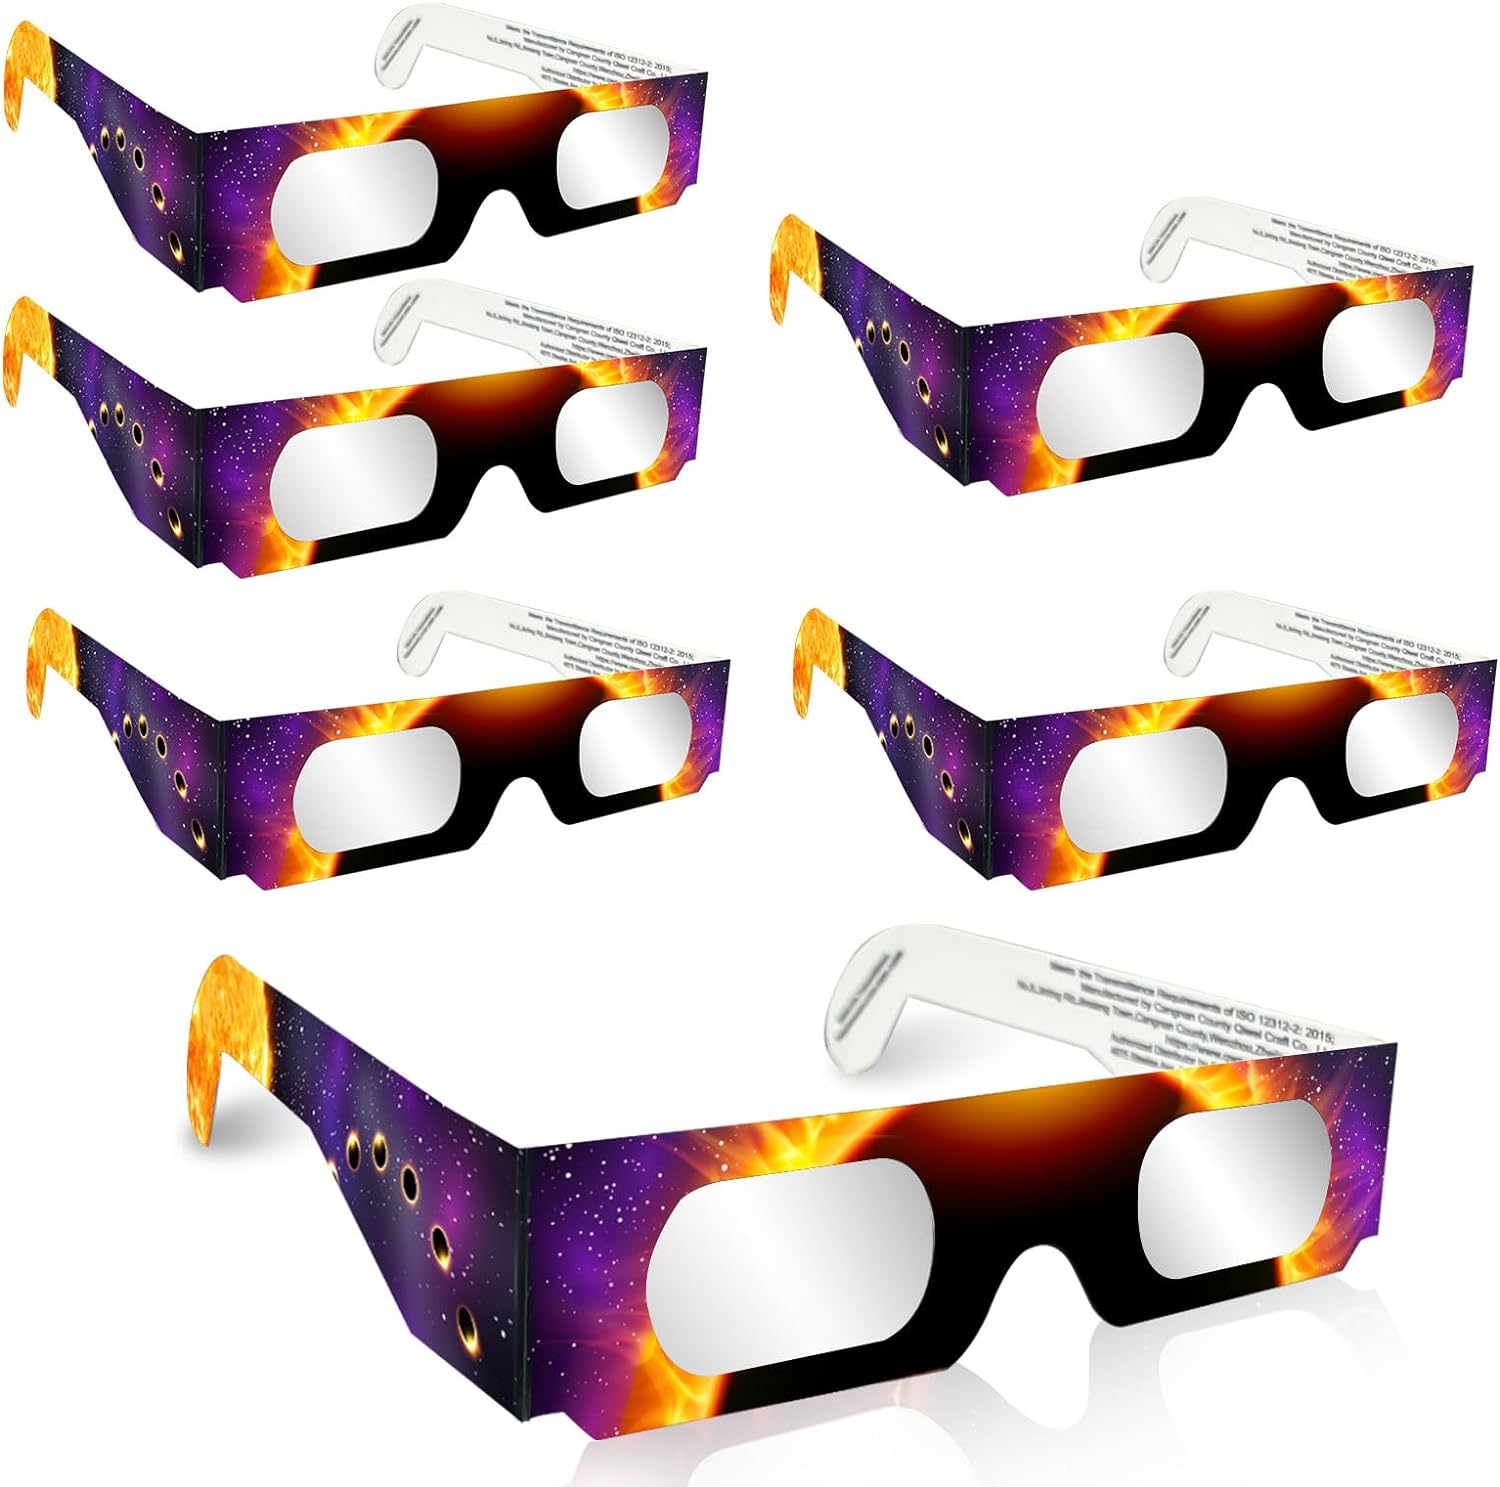 Solar Eclipse Glasses (6 Pack) - CE and ISO Certified Safe Shades for Direct Sun Viewing